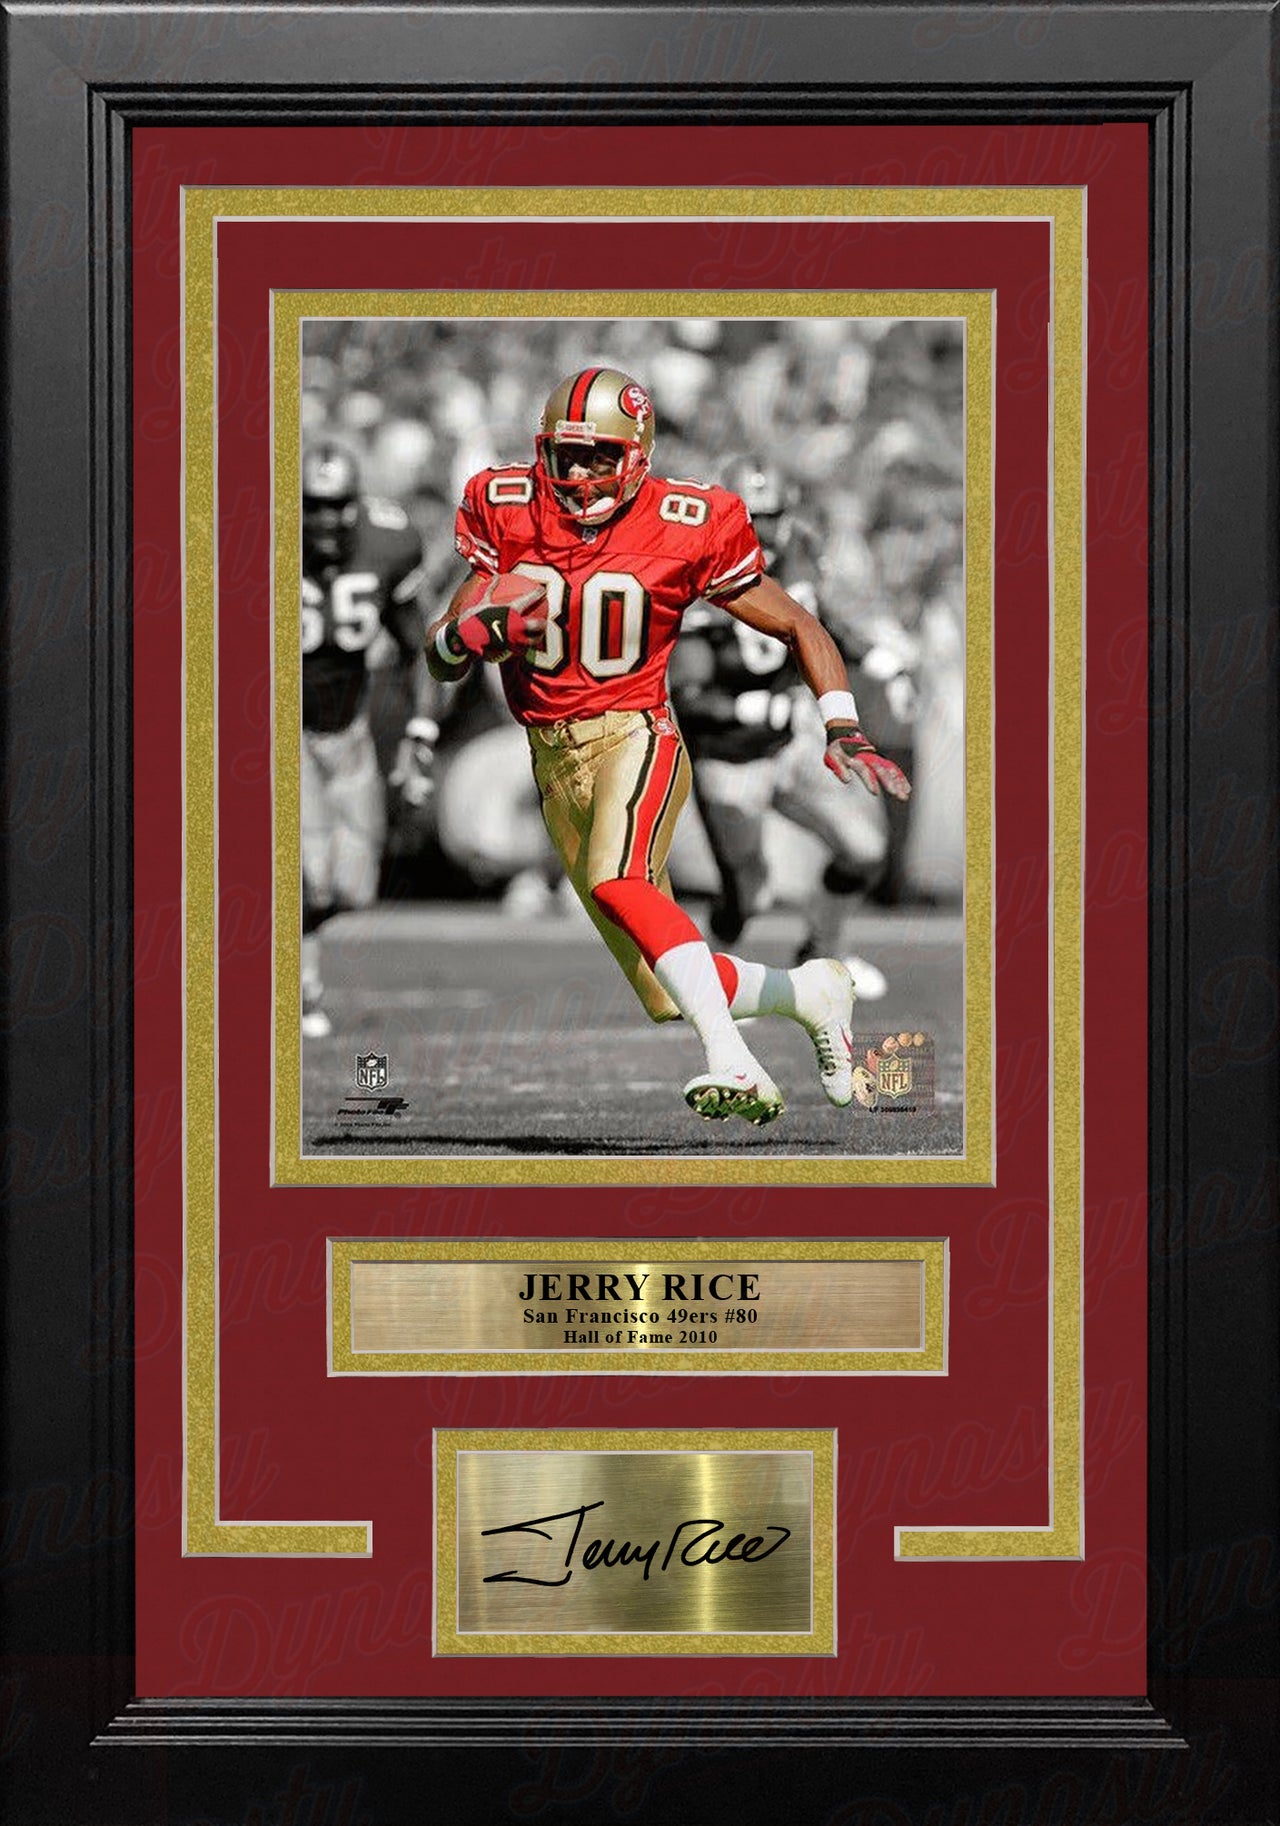 Jerry Rice San Francisco 49ers 8" x 10" Framed Football Spotlight Photo with Engraved Autograph